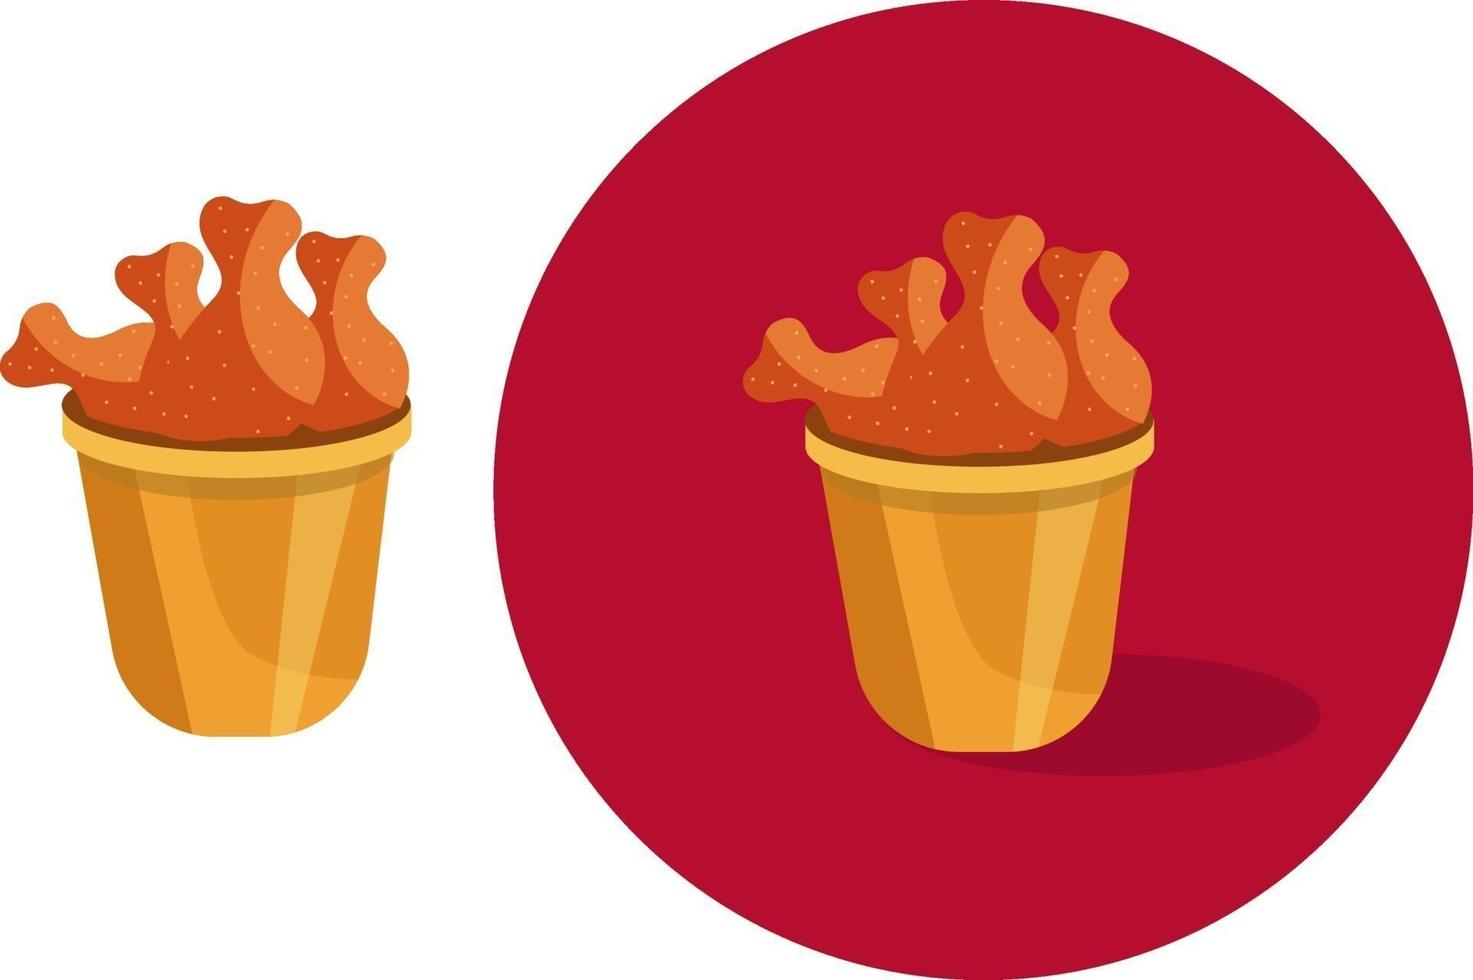 Fried chicken, illustration, vector on a white background.